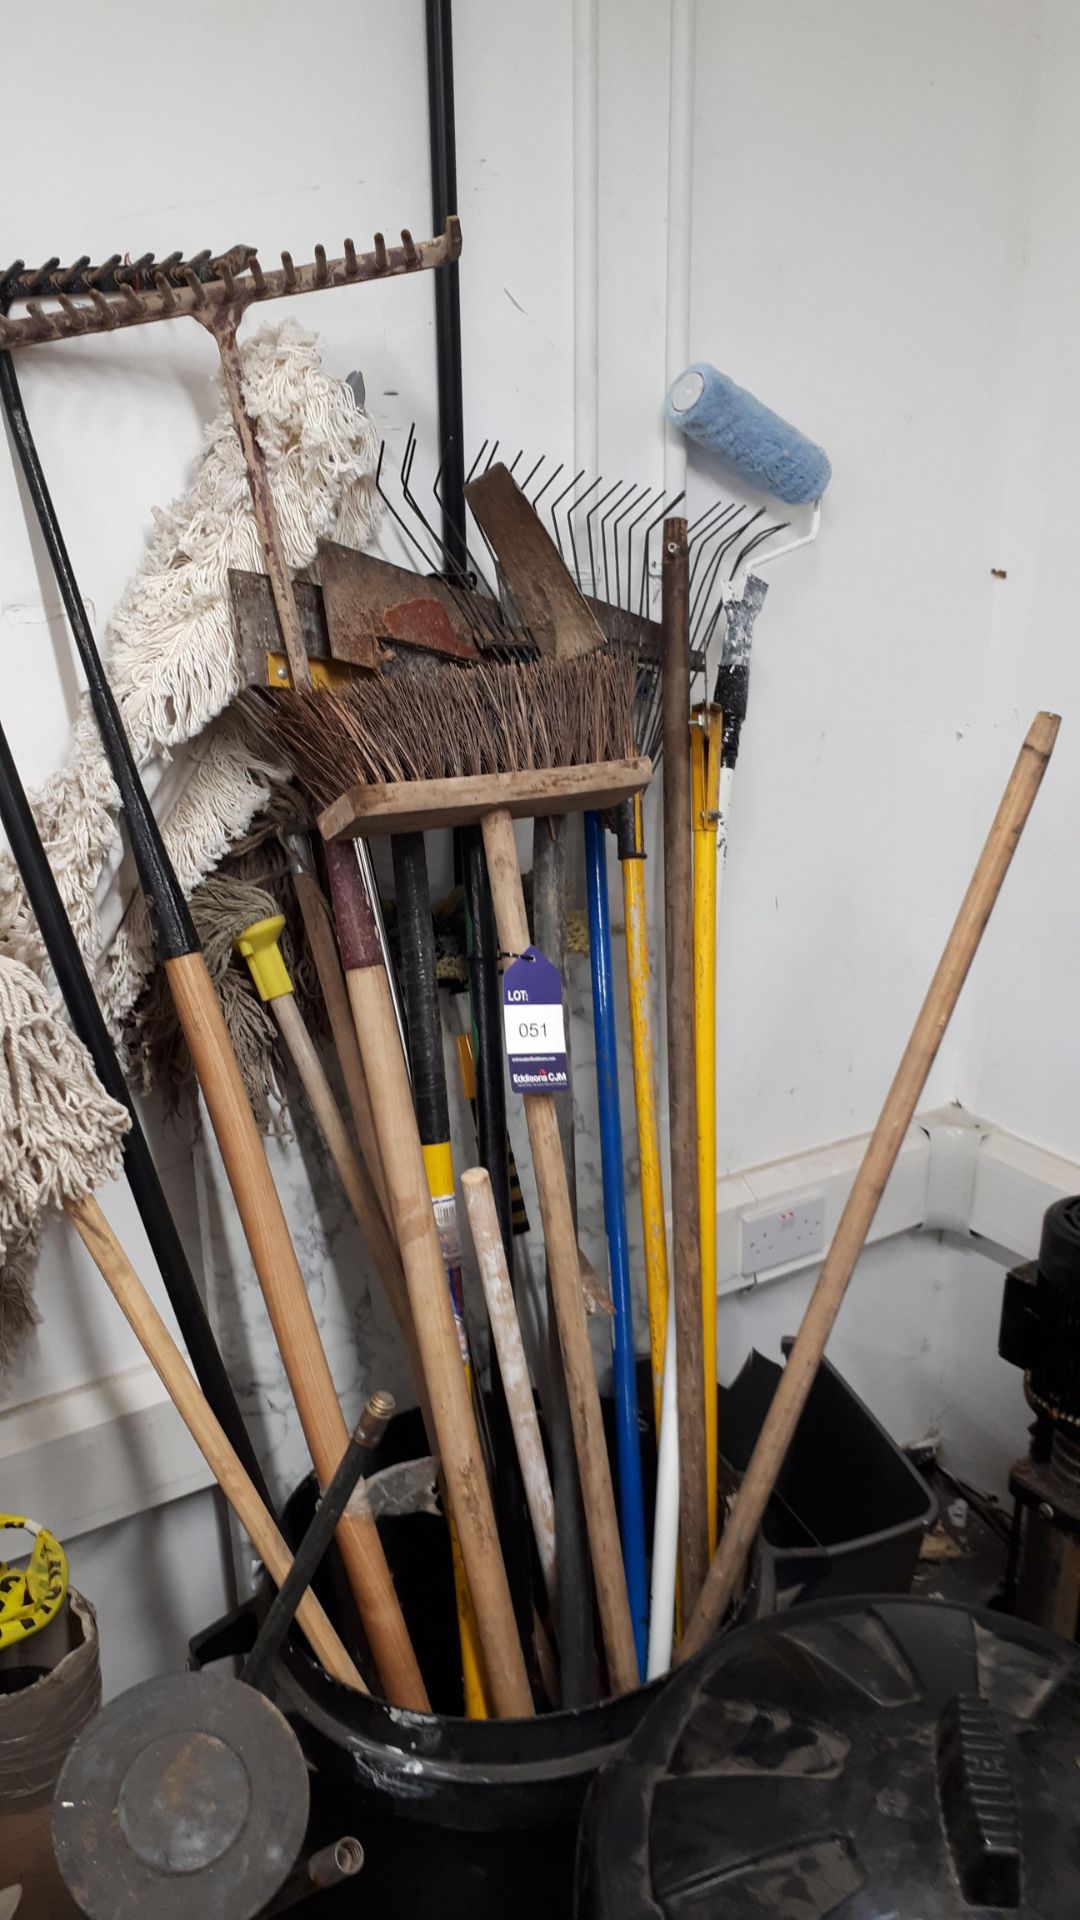 Large quantity of cleaning hand tools to bin, to include scrapers, mops etc